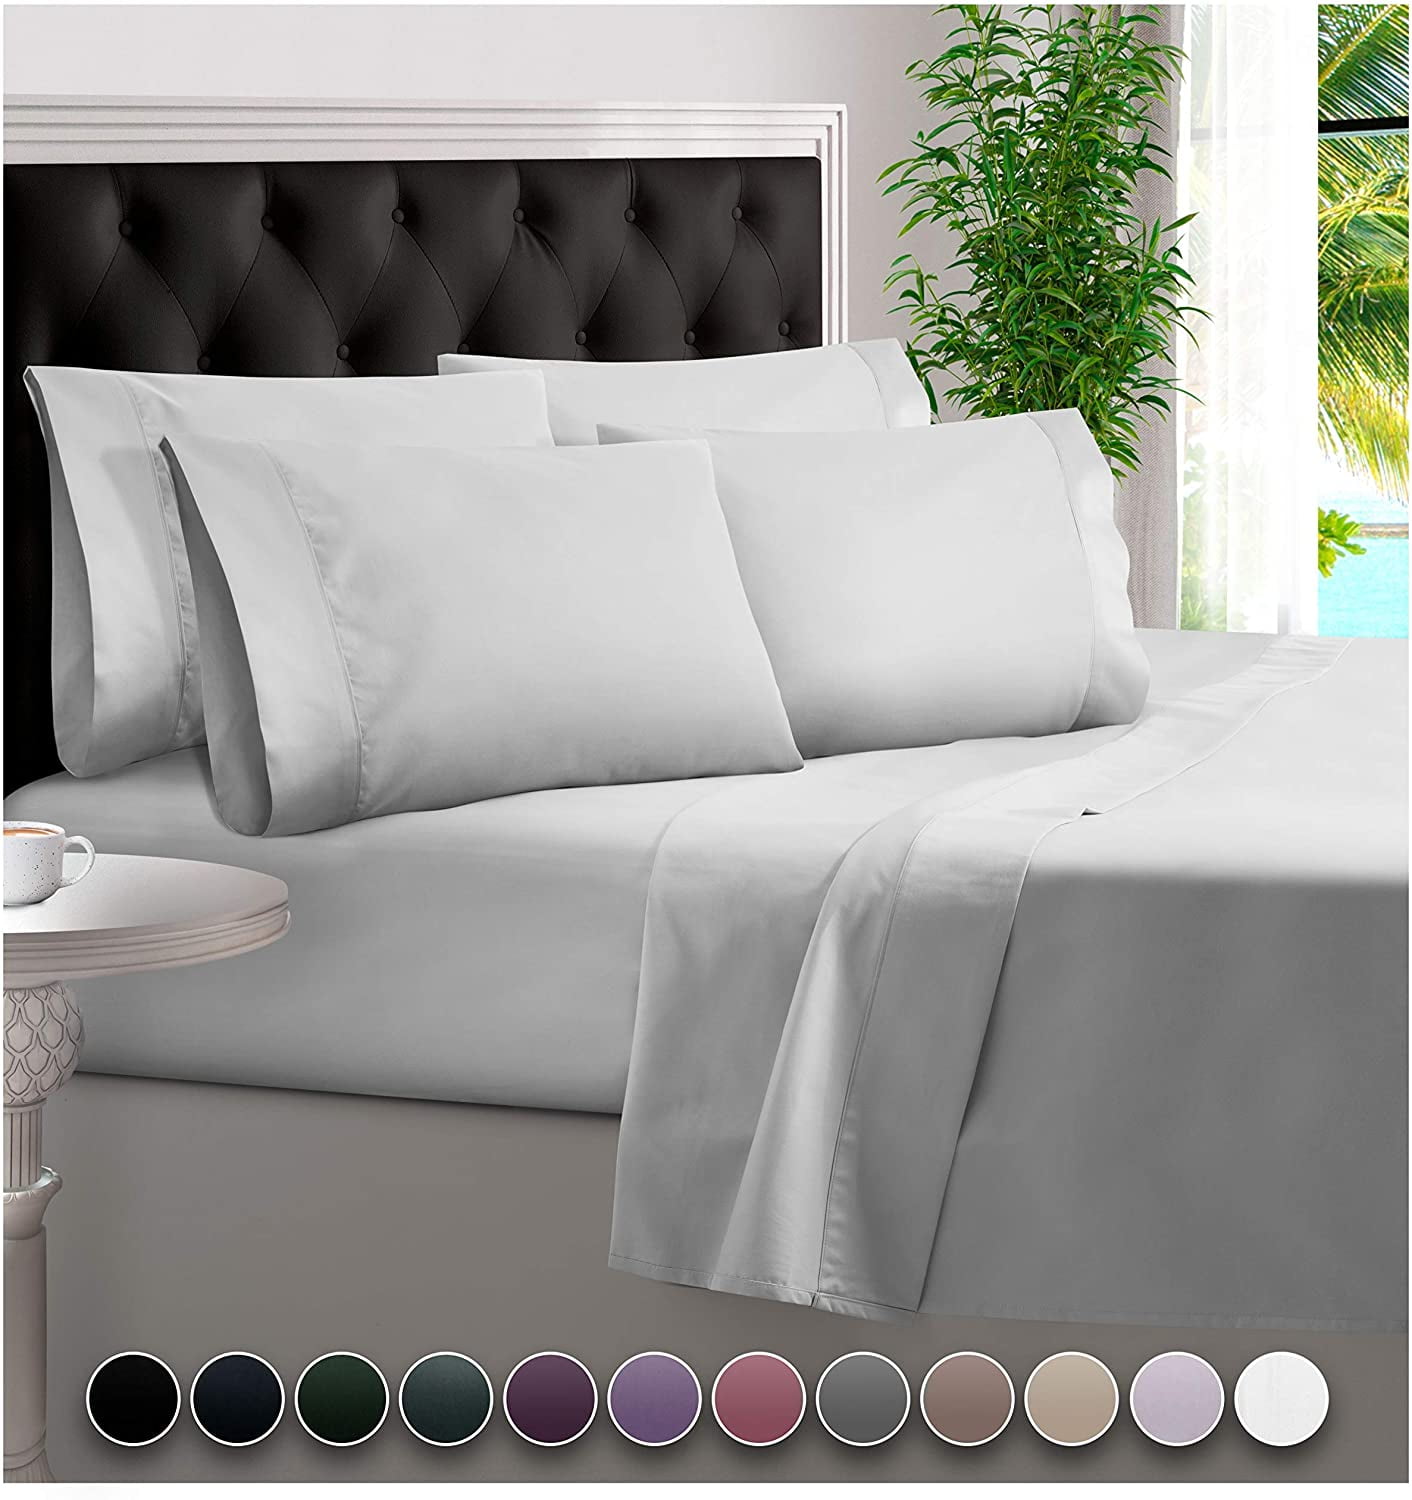 10 colours Queen 4 Full King Piece Luxurious Bamboo Sheets 